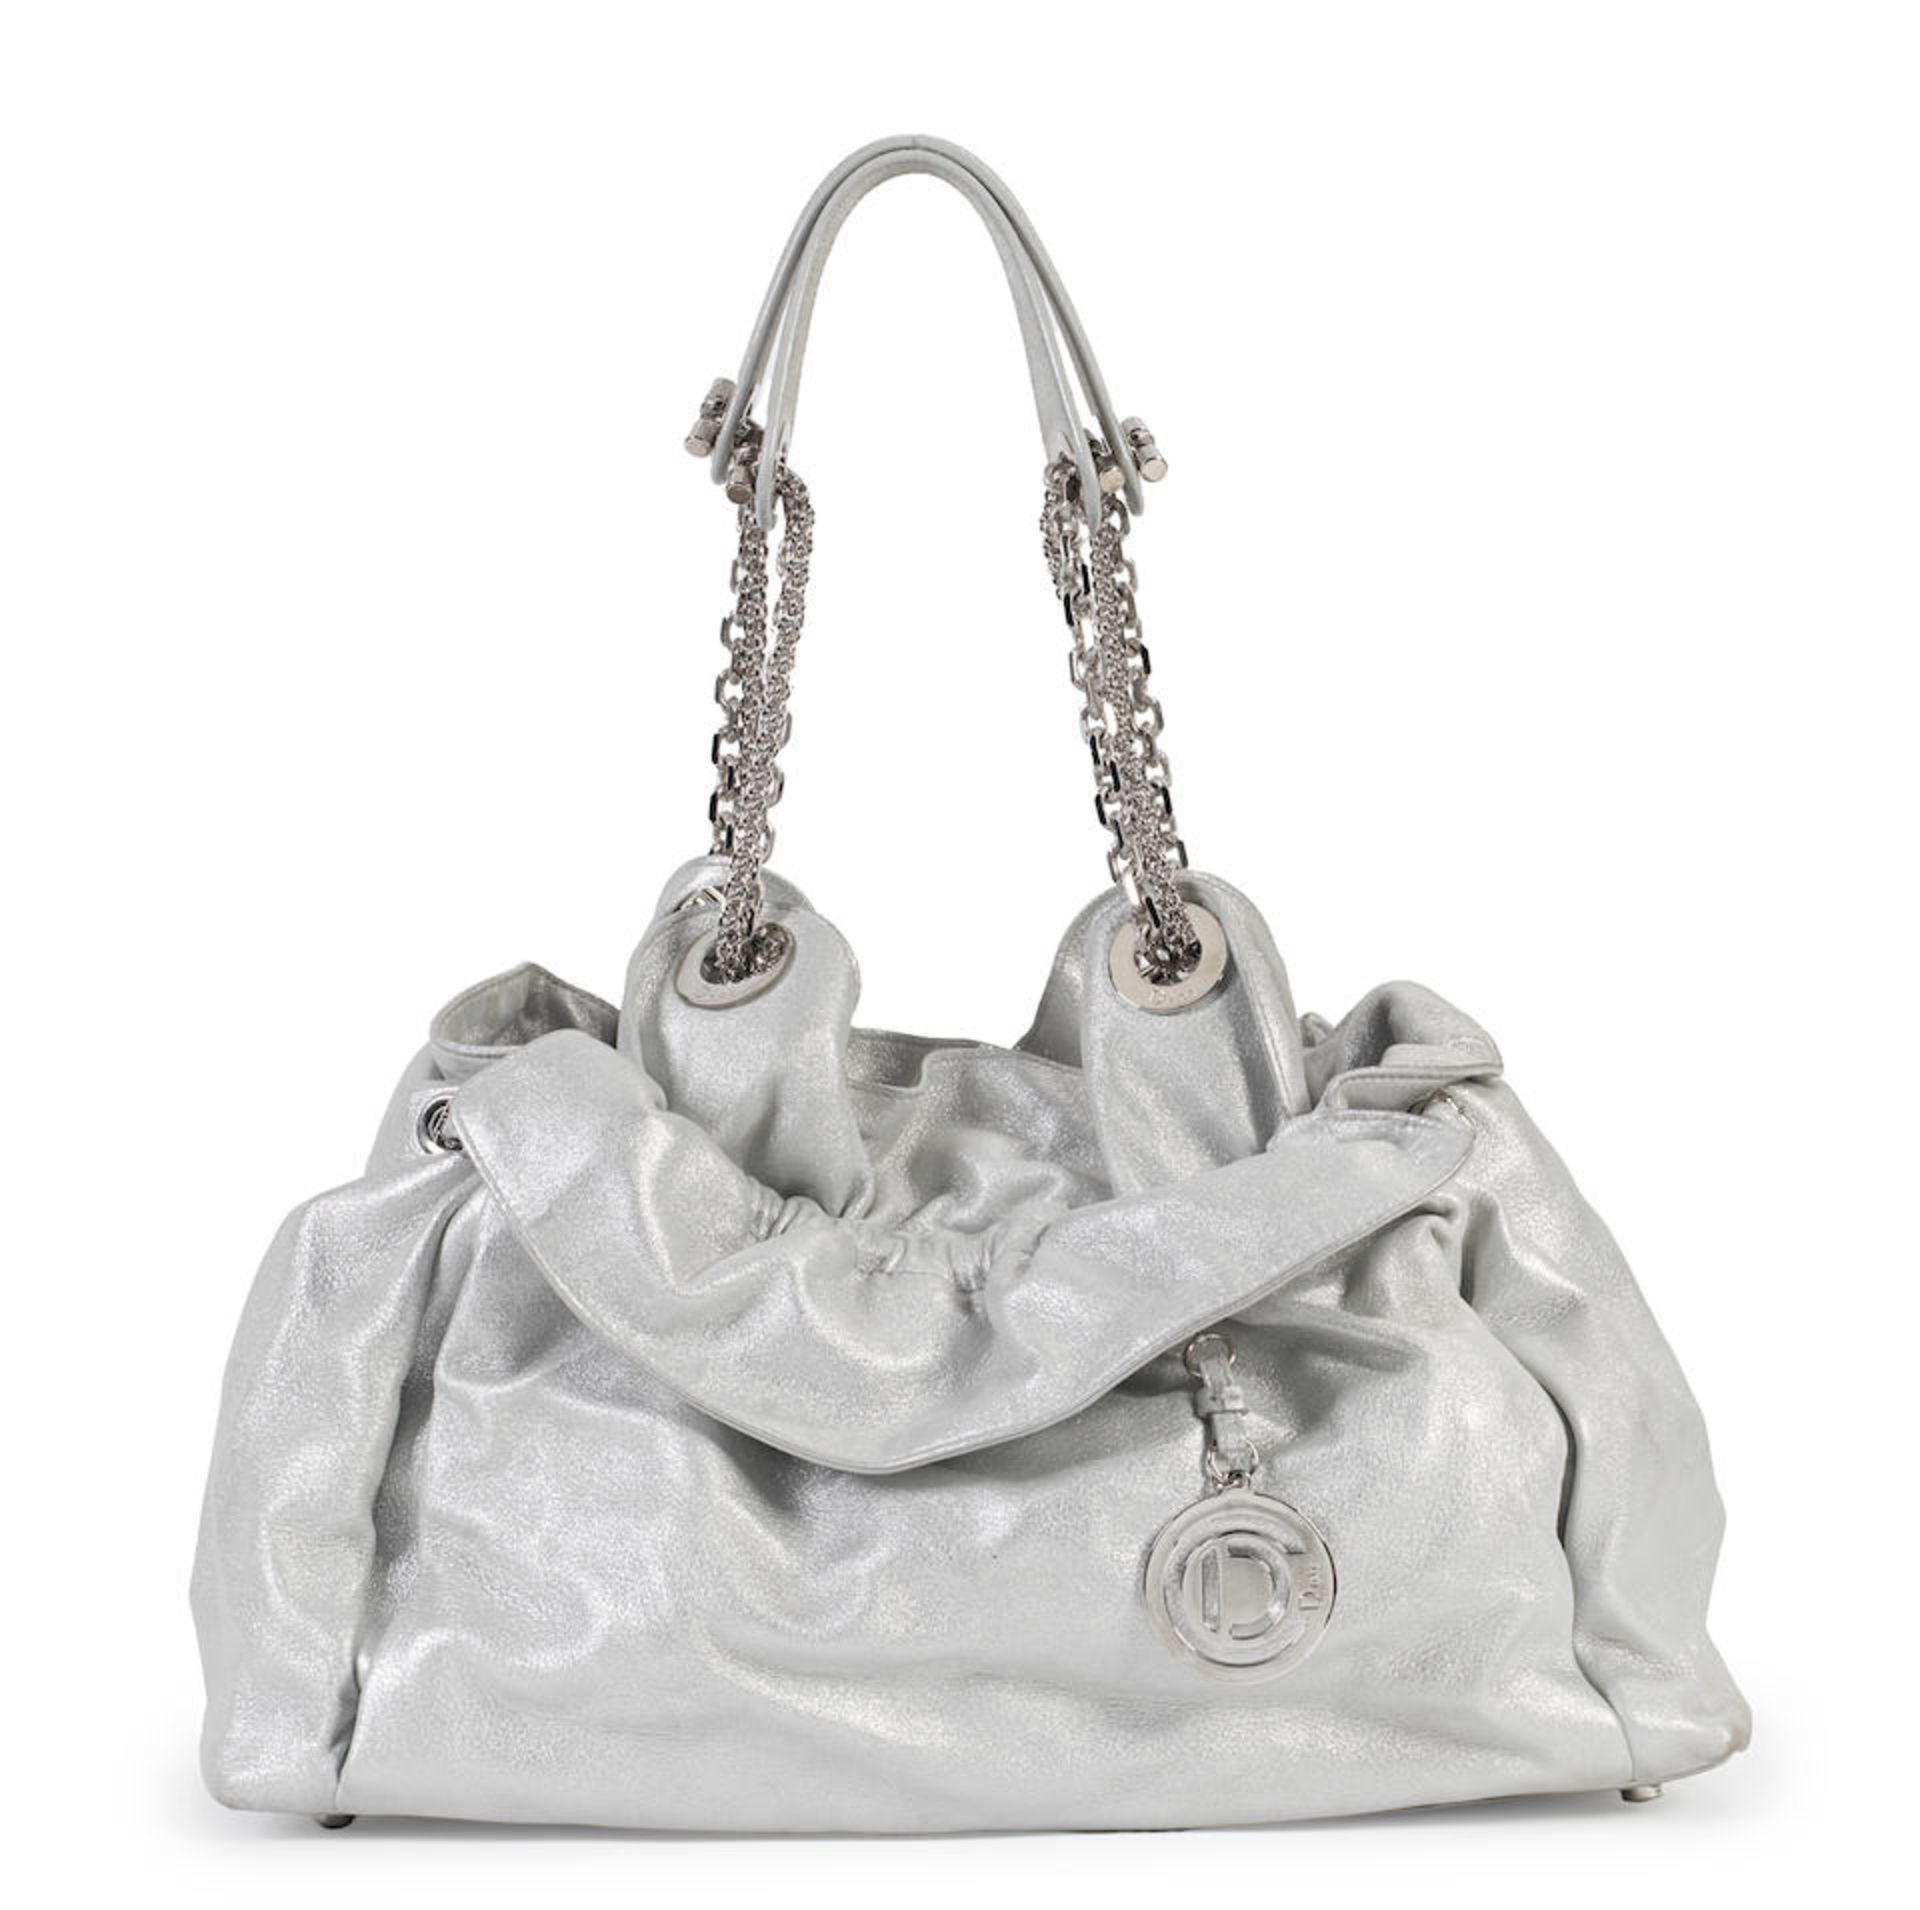 John Galliano for Christian Dior: a Silver Suede Le Trente Bag 2009 (includes dust bag)